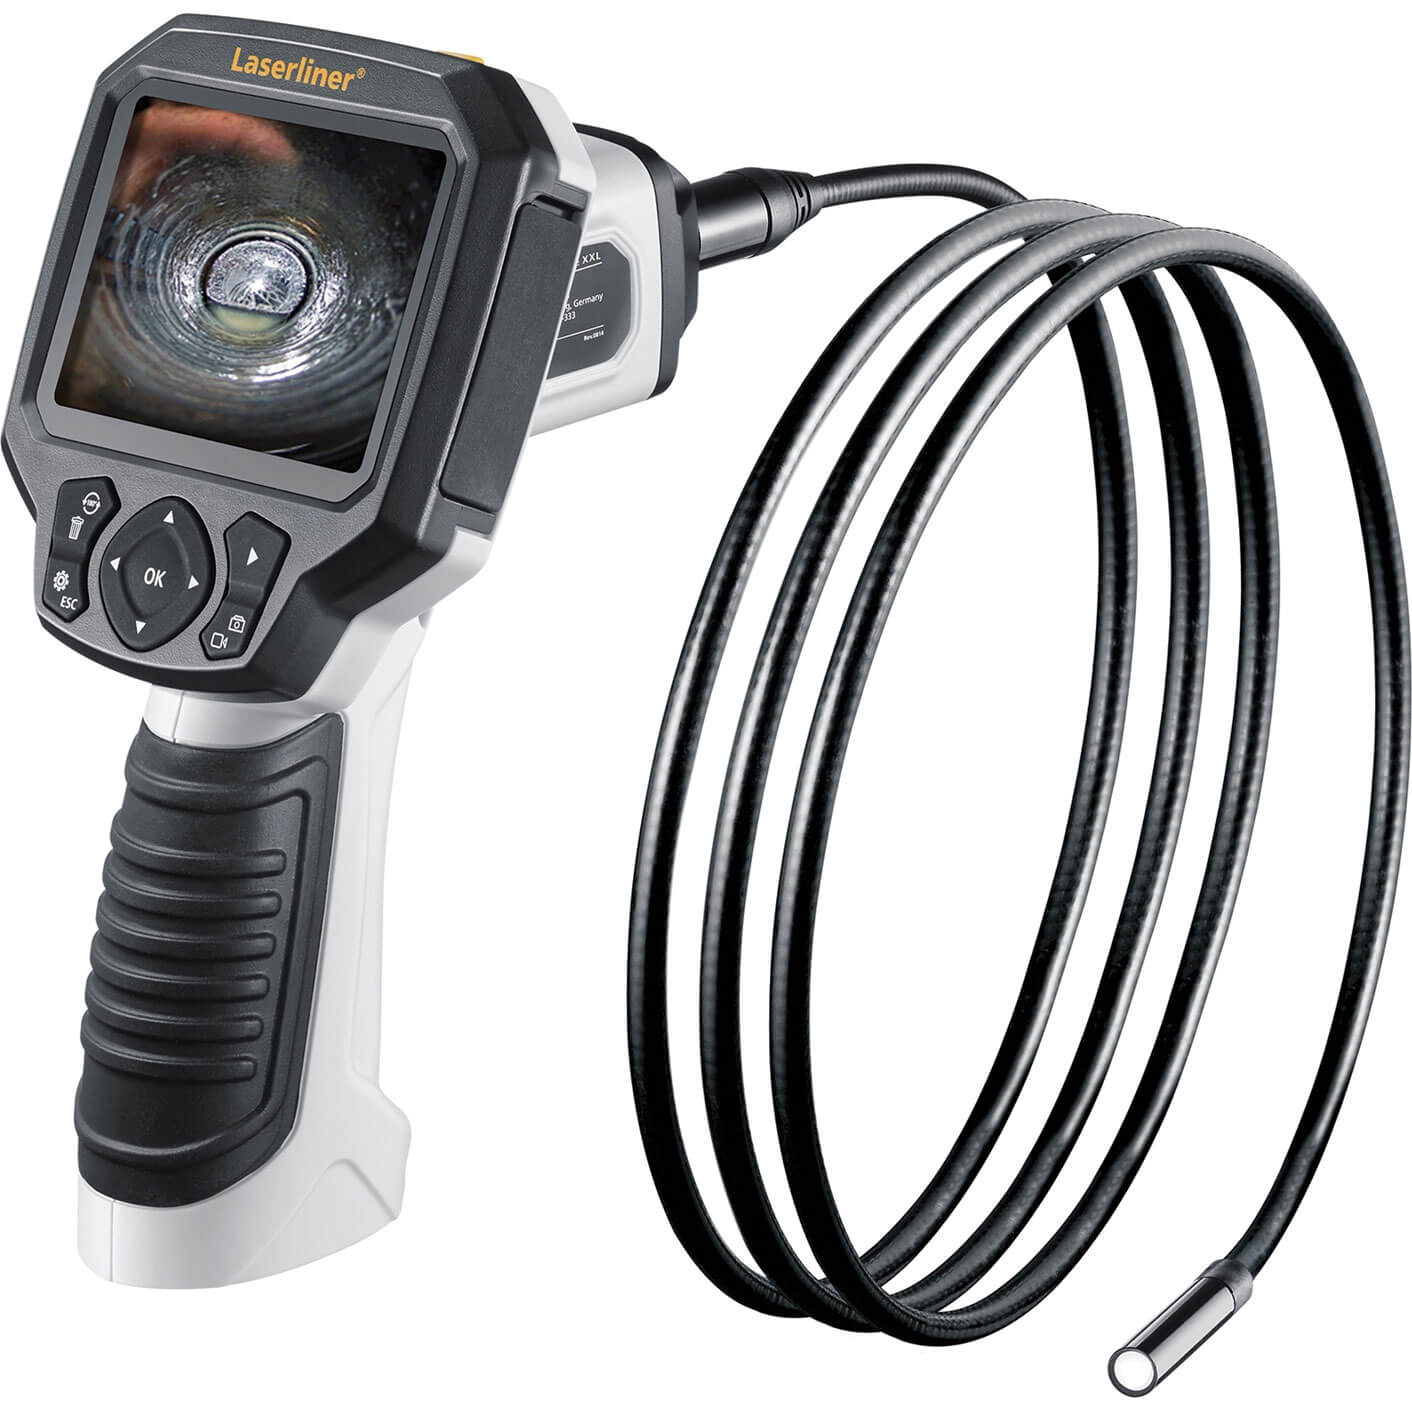 Photo of Laserliner Videoscope Xxl Recordable Inspection Camera 5 Metre Long